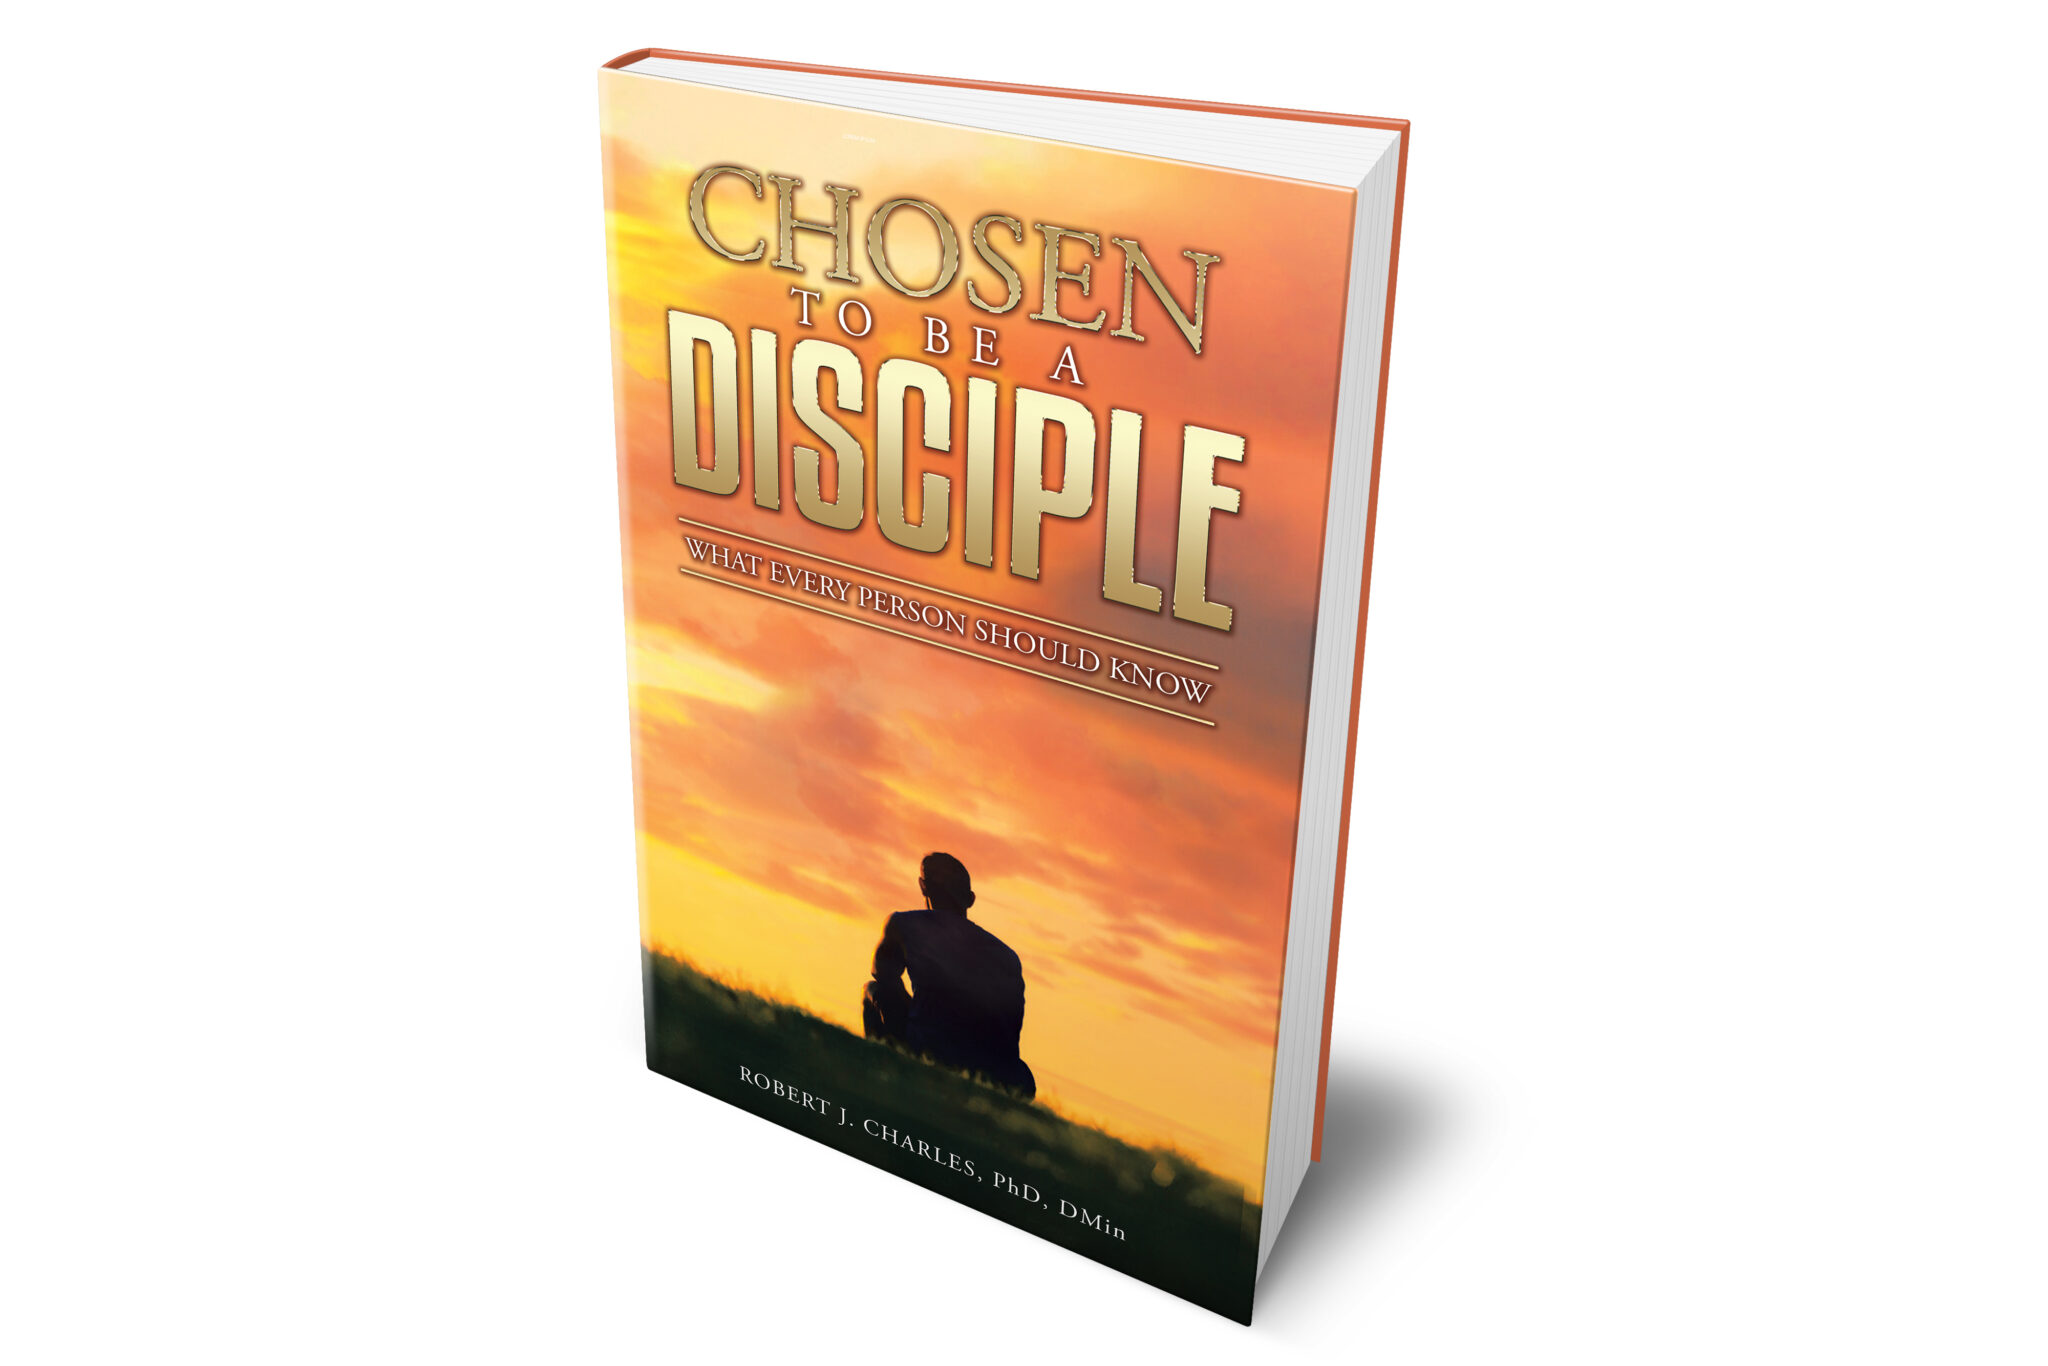 Dr. Robert J. Charles Releases Book "Chosen to Be A Disciple" to Rave Reviews